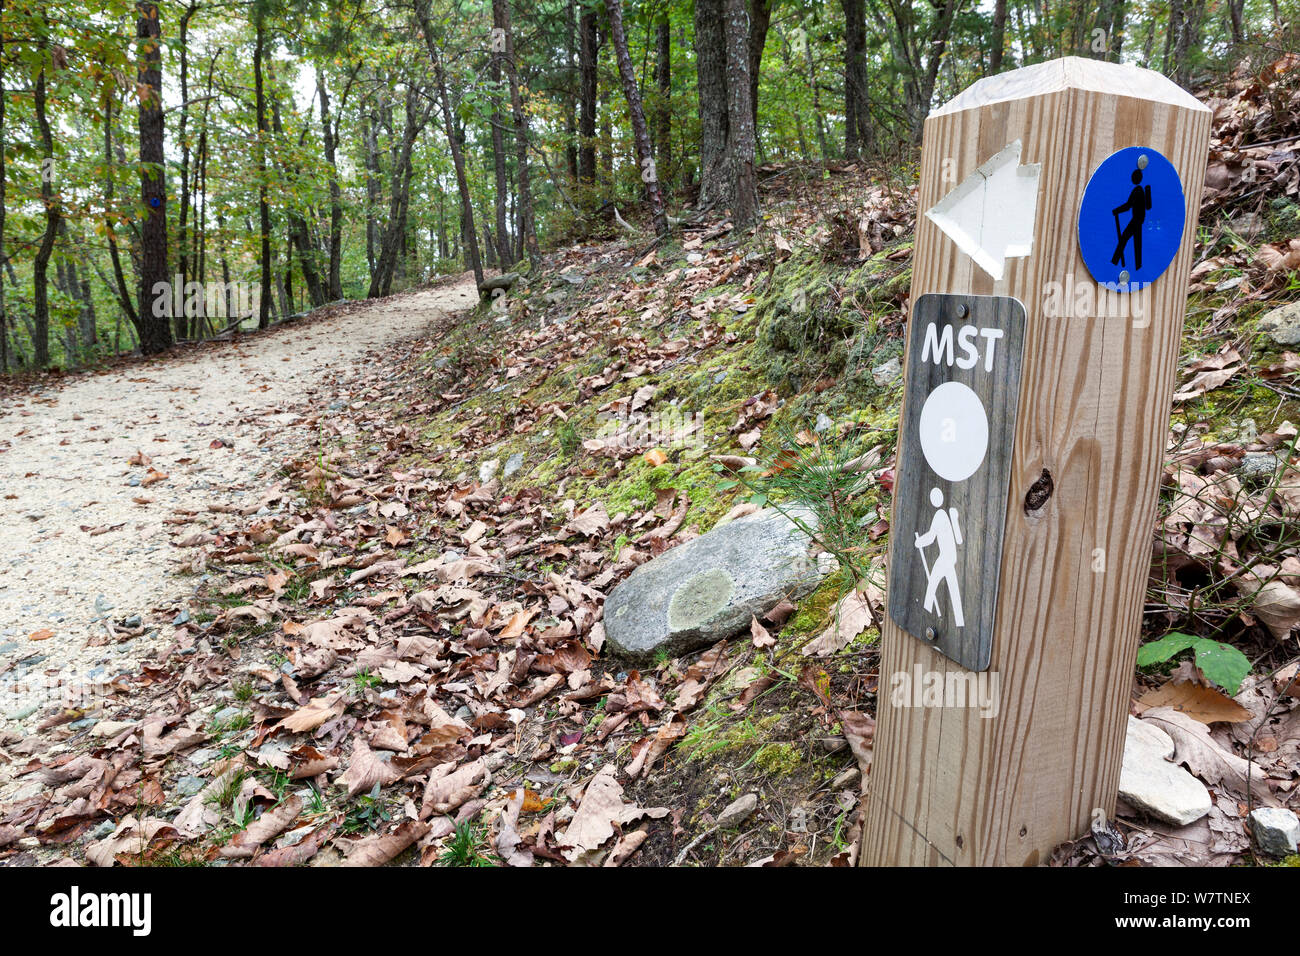 The Grindstone Trail, part of the Mountain-To-Sea trail, in Pilot Mountain State Park. North Carolina, USA, October 2013. Stock Photo